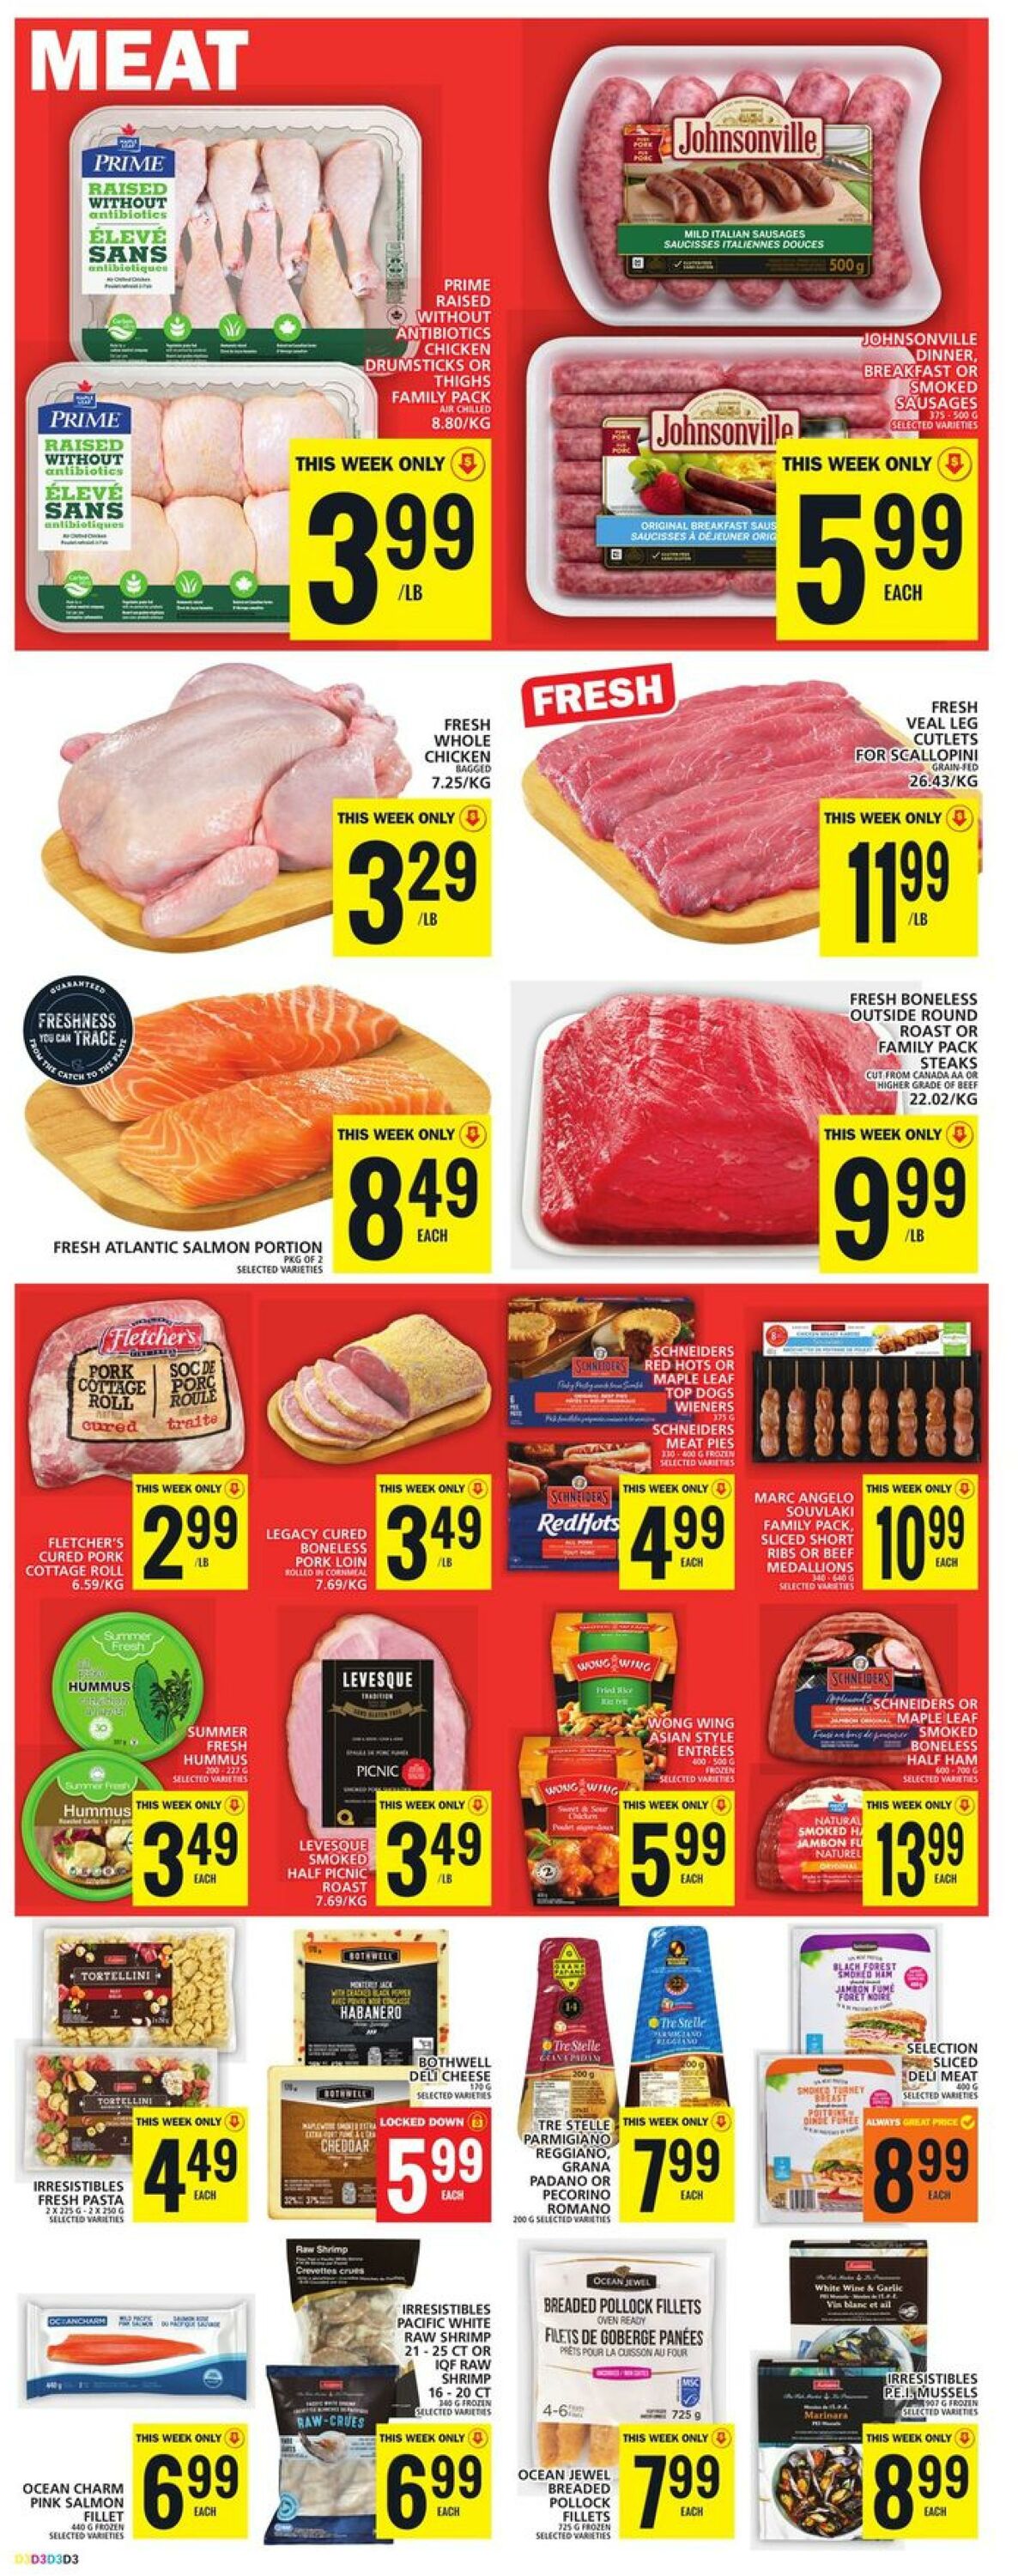 Food Basics Promotional Flyer - Valid from 16.11 to 22.11 - Page nb 11 ...